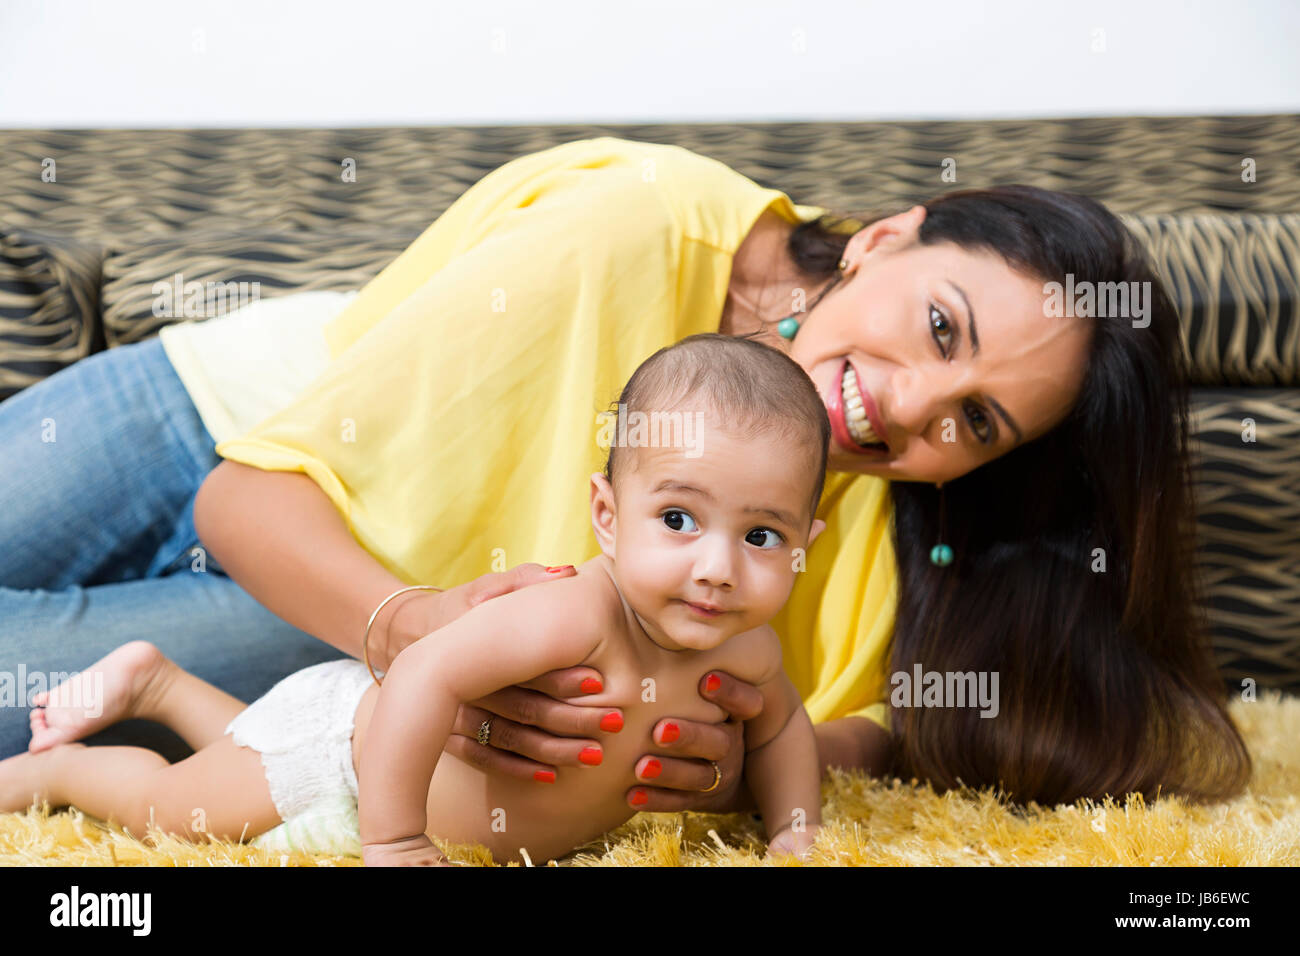 2 People Adult Woman At Home Baby Beginning Boy Mother Smiling Son Togetherness Stock Photo